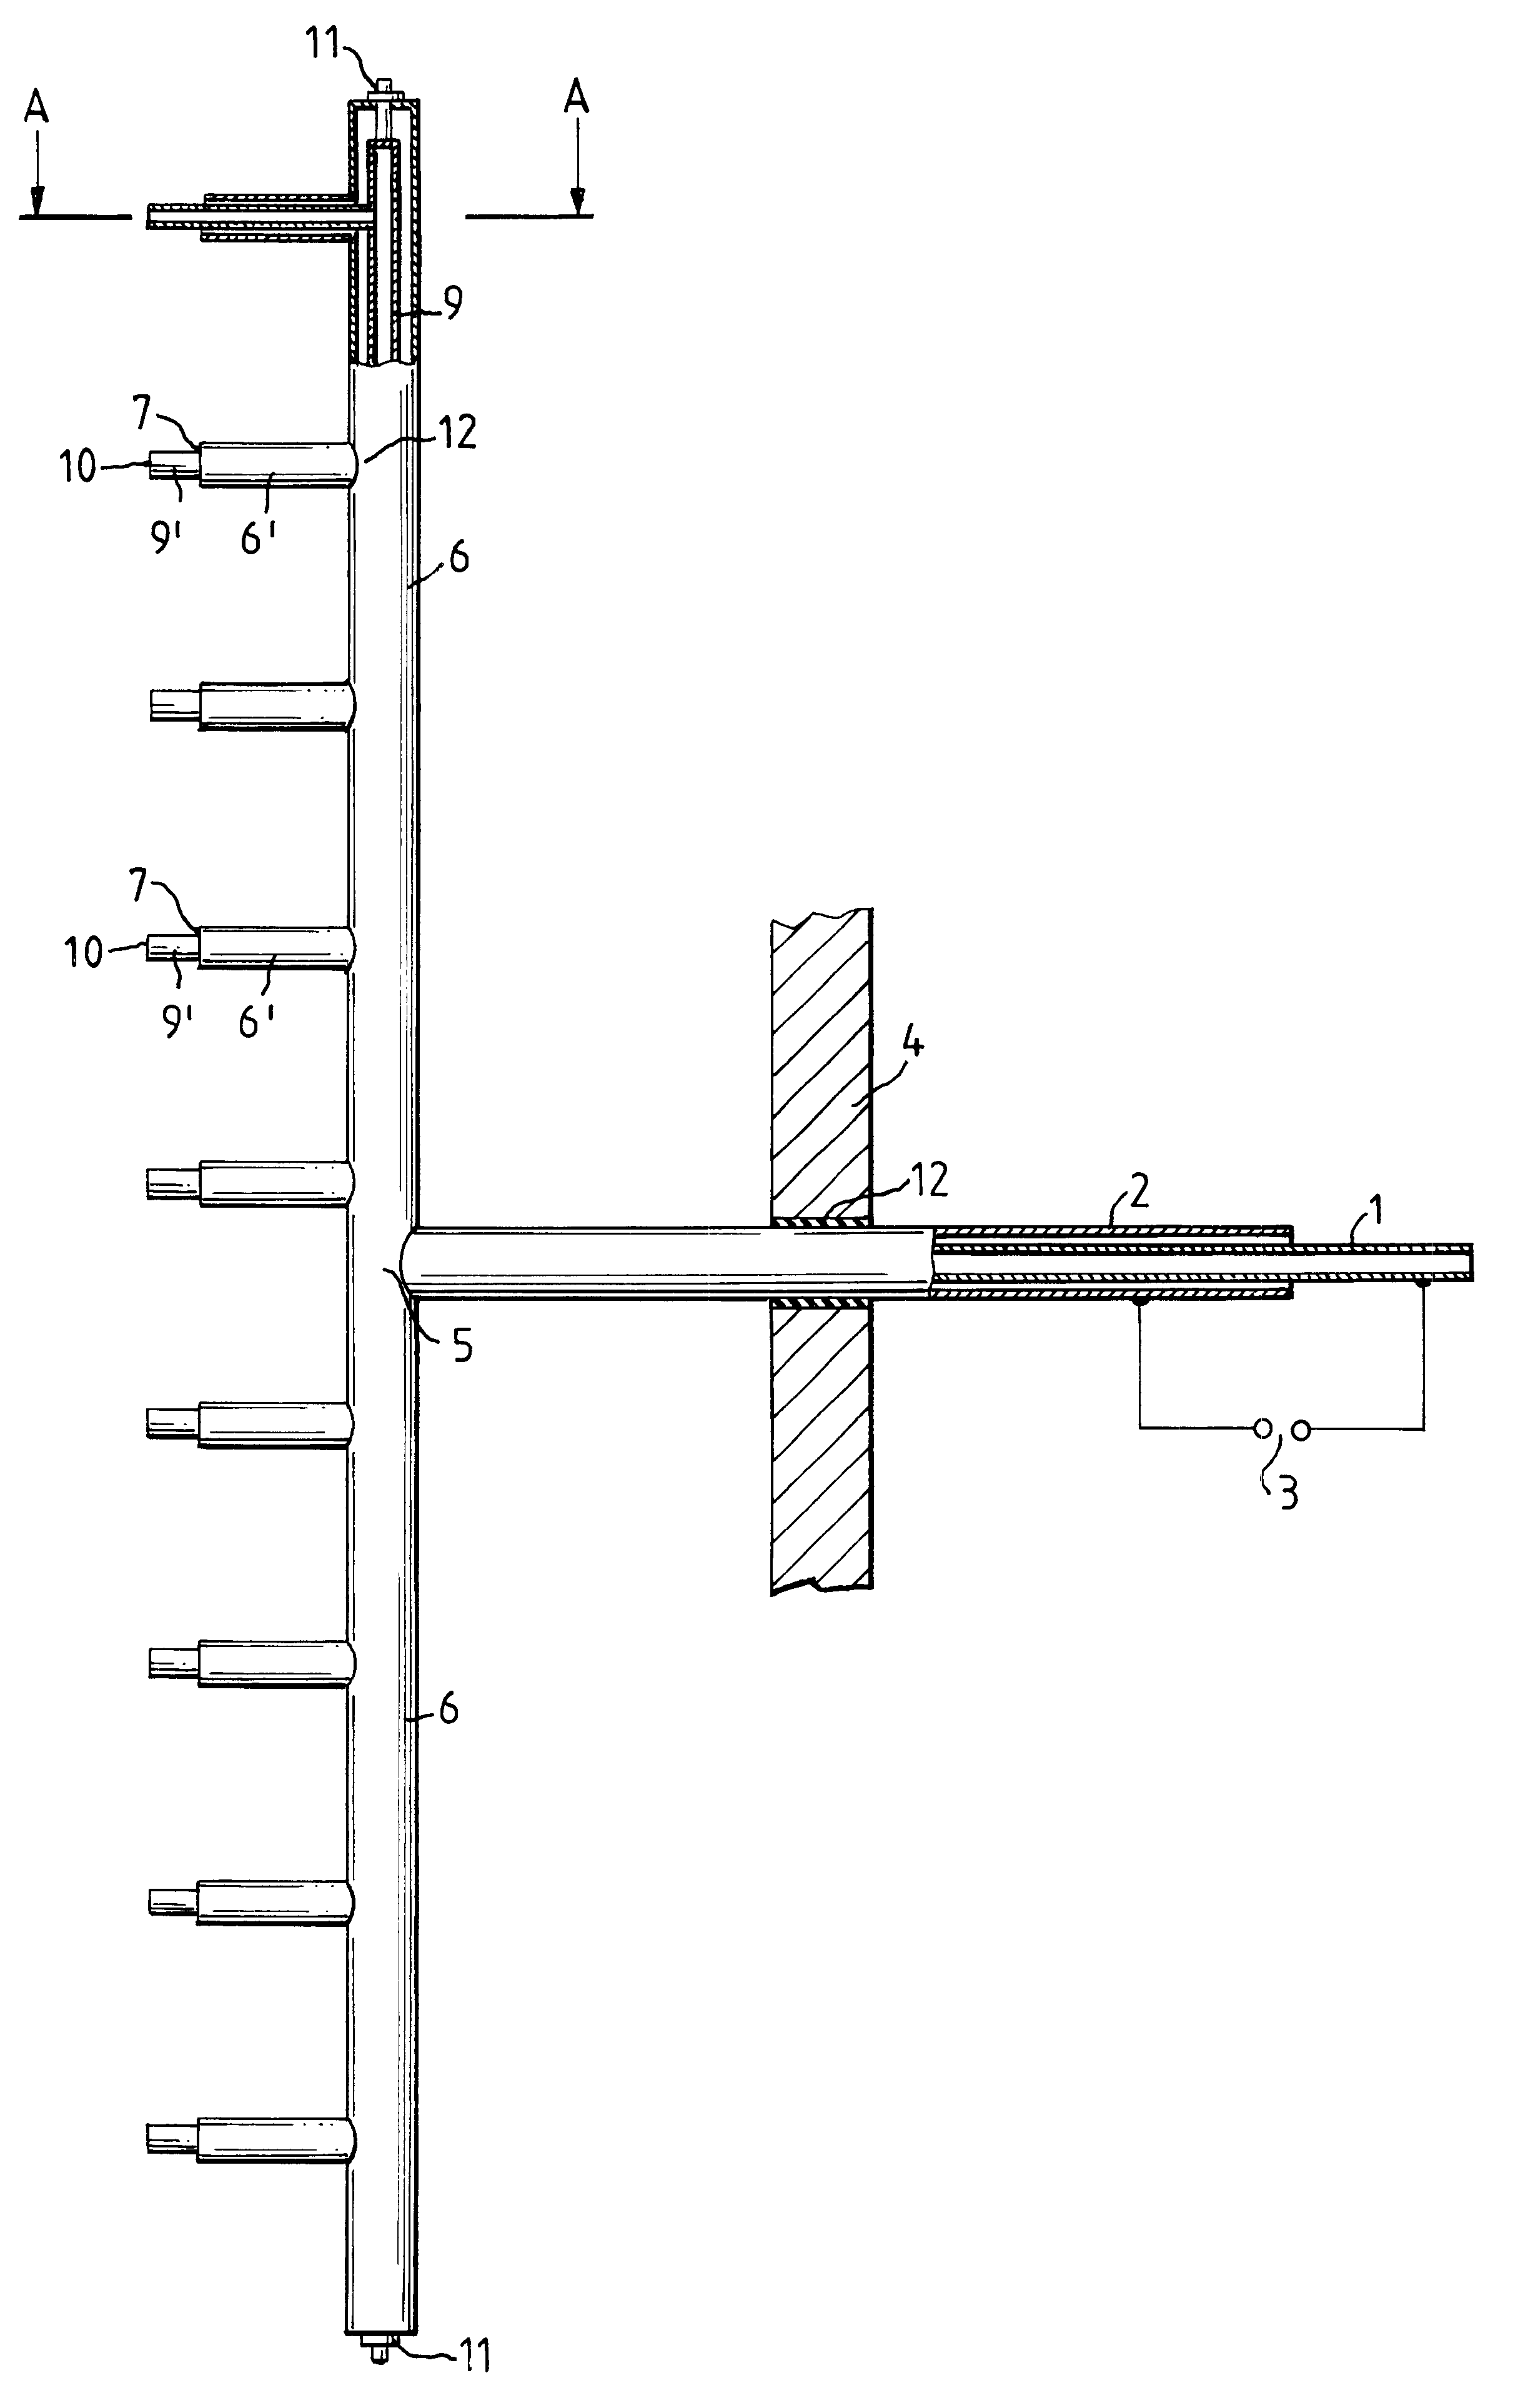 Method for transporting at least one vaporous substance through the wall of a vacuum chamber and into the vacuum chamber and a device for executing and utilizing the method